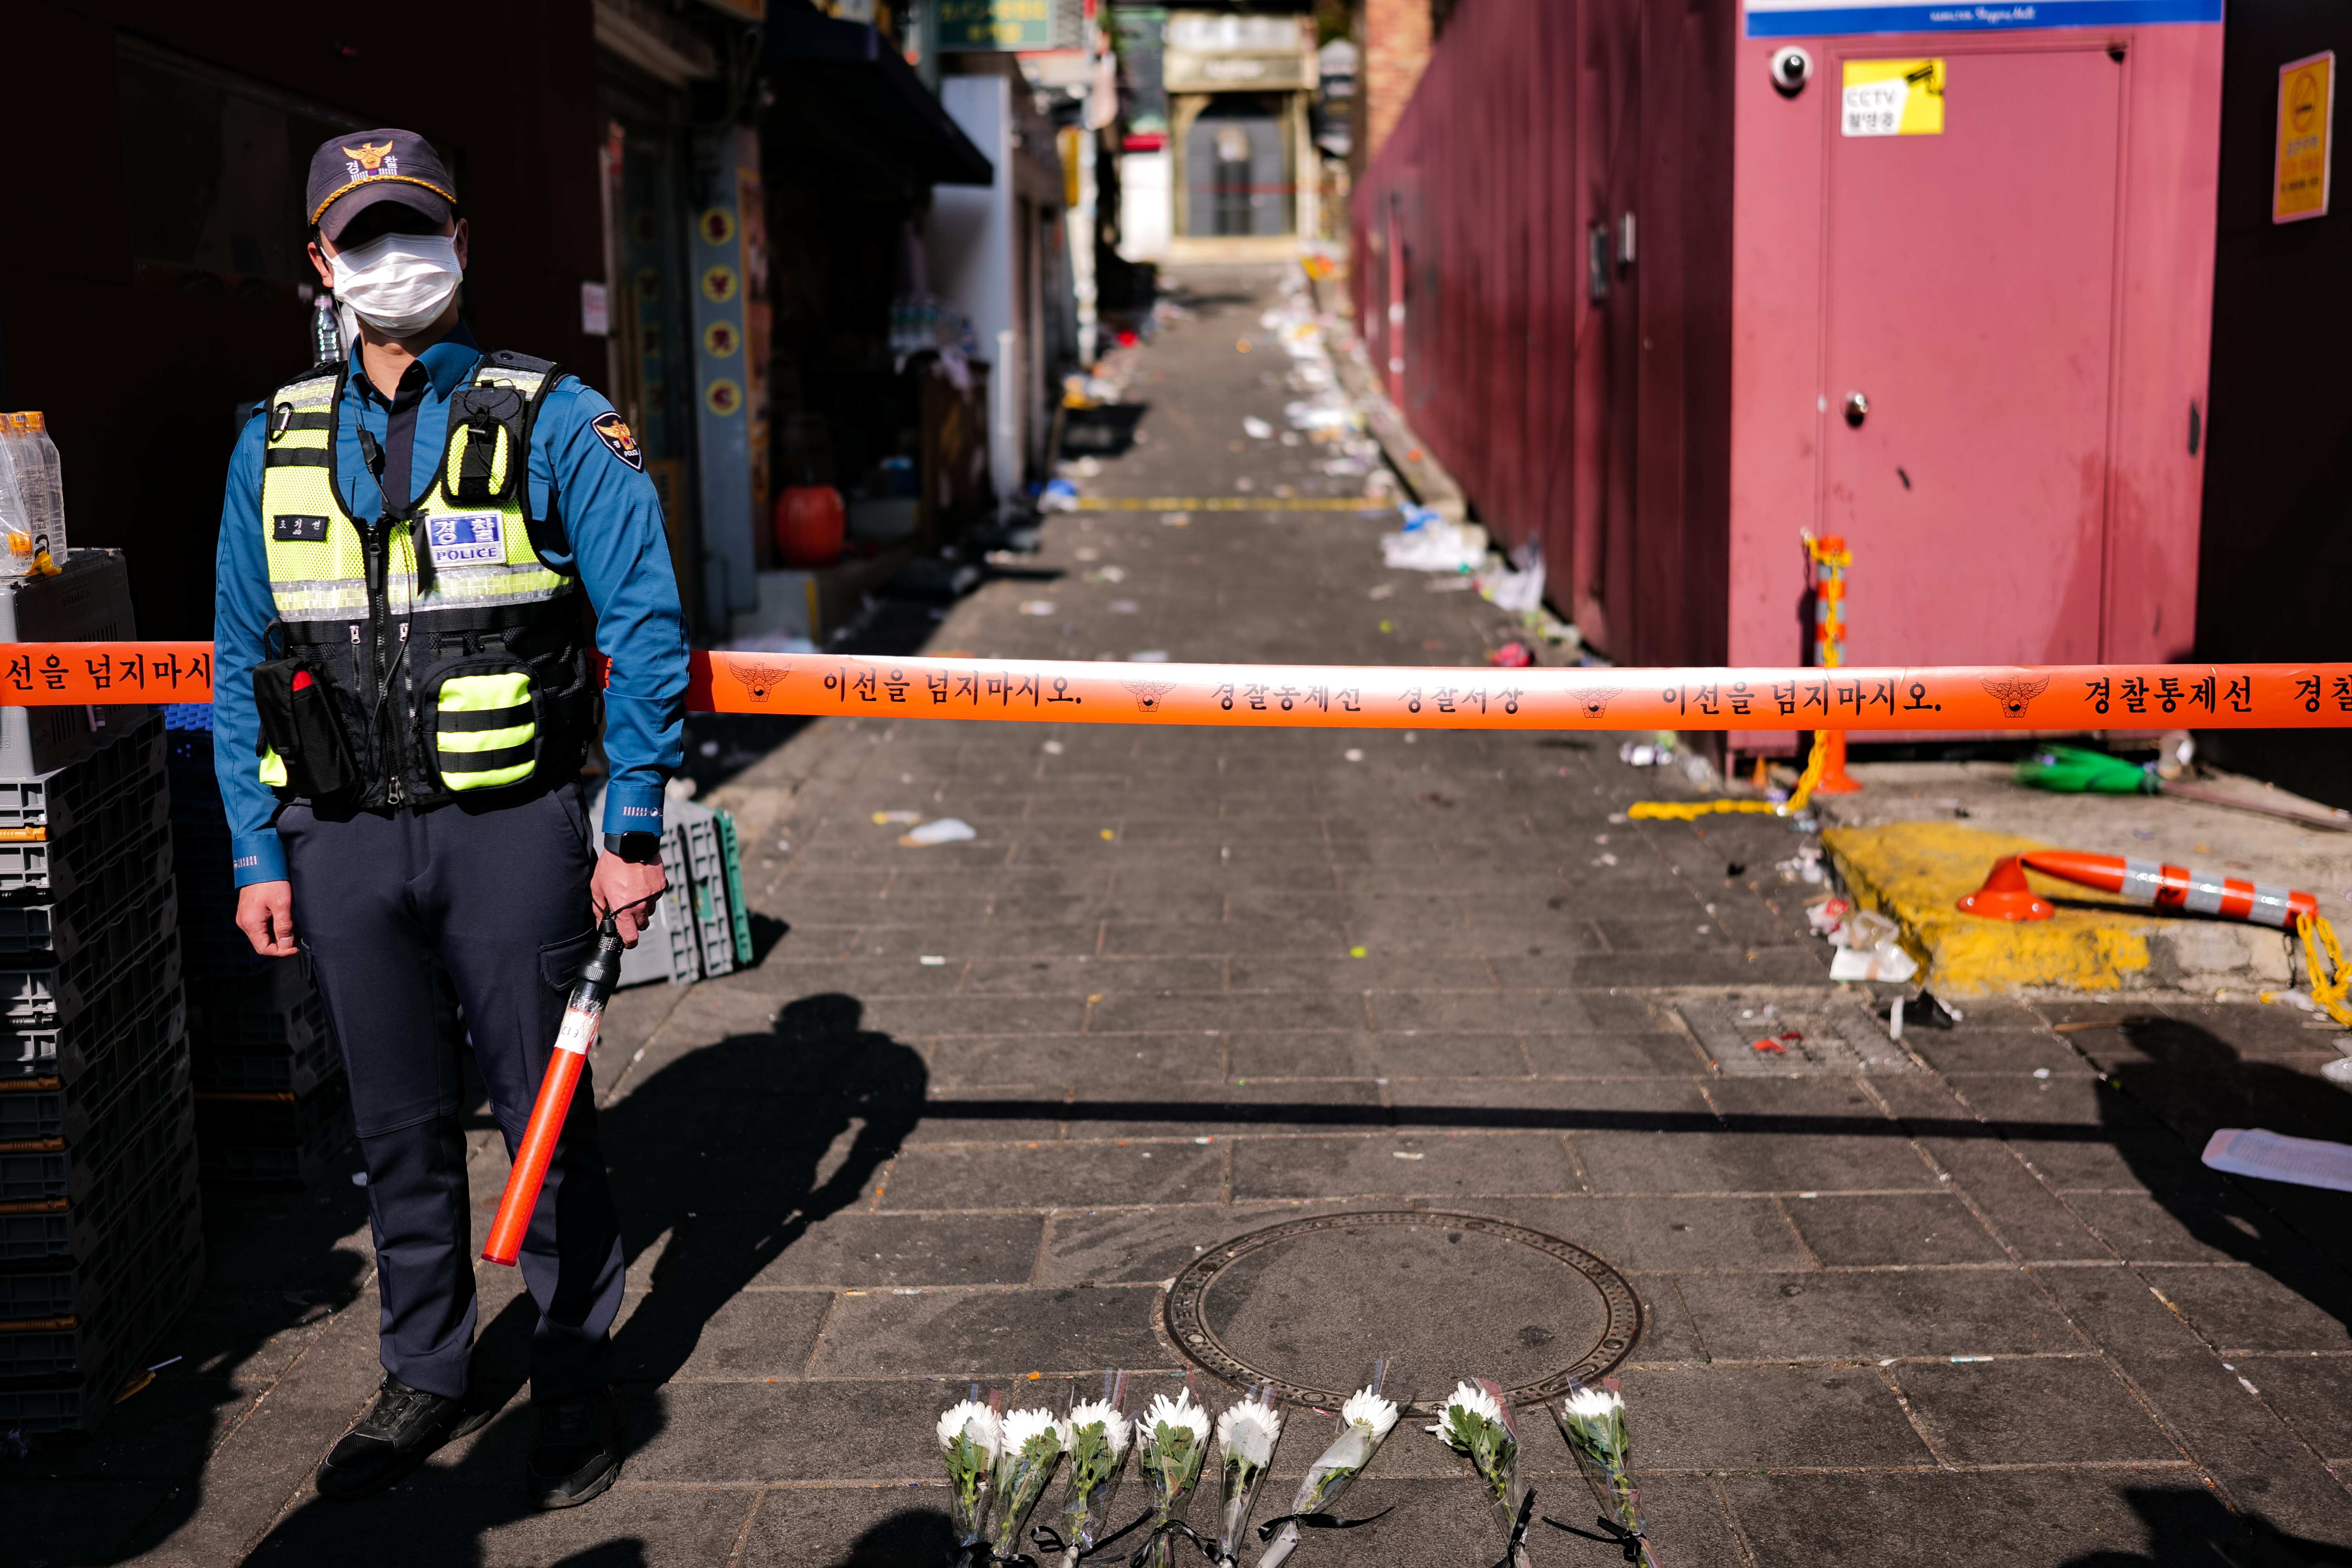 Police block off entry to an alleyway following a deadly crowd crush in Seoul, South Korea. 